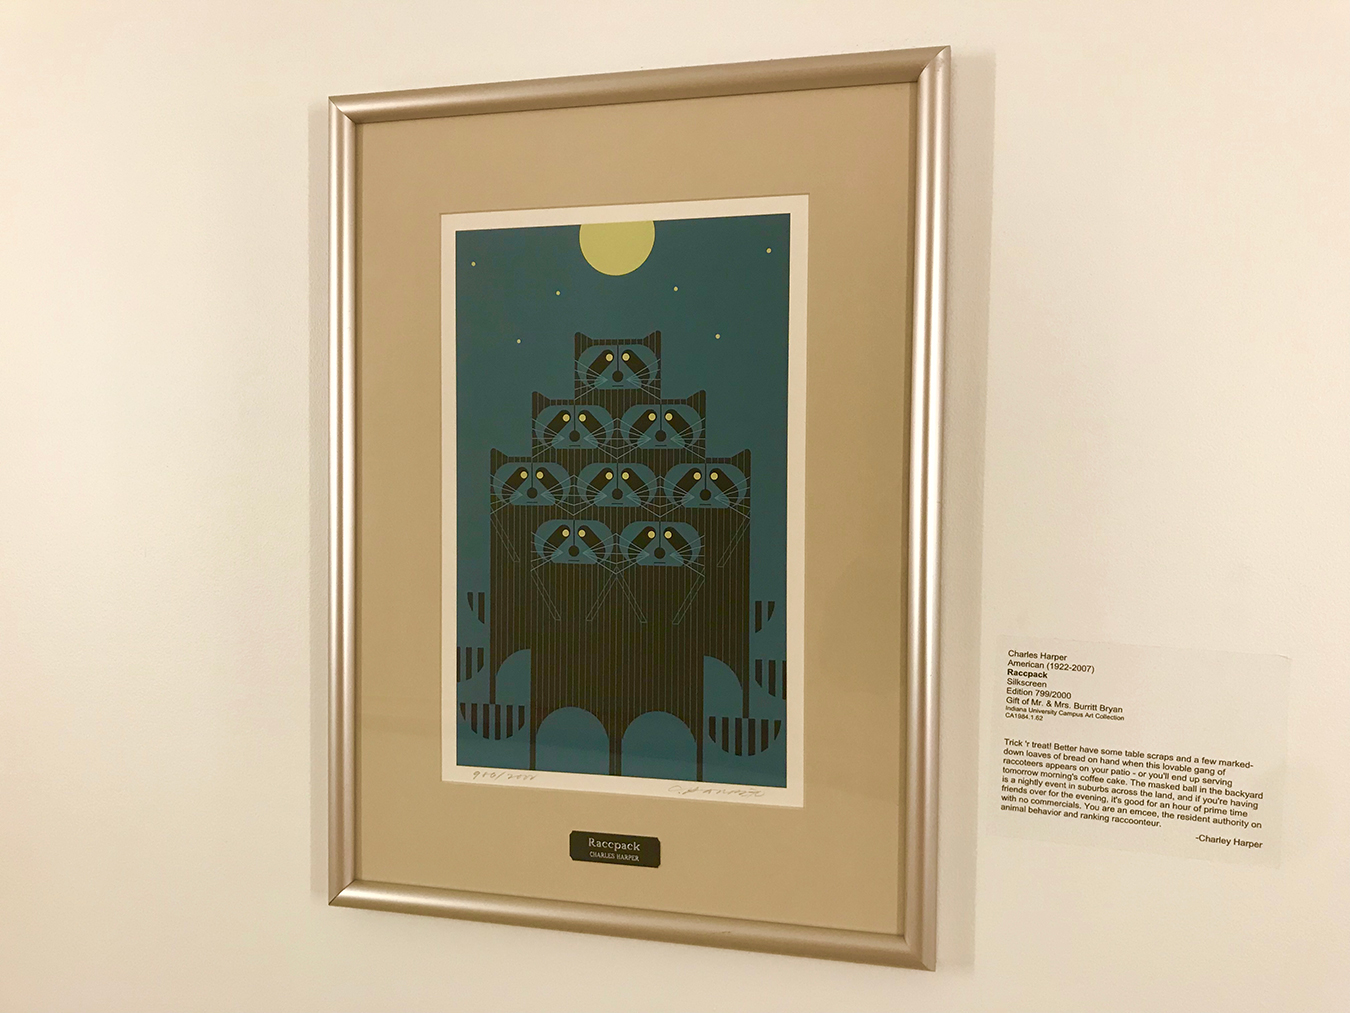 An example of Charles Harper's graphic wildlife illustrations, Raccpack is a silkscreen edition found in the IMU down the hallway to the left of the bowling alley, toward the office of the Dean of Students. | Photo by Samuel Weslch Sveen